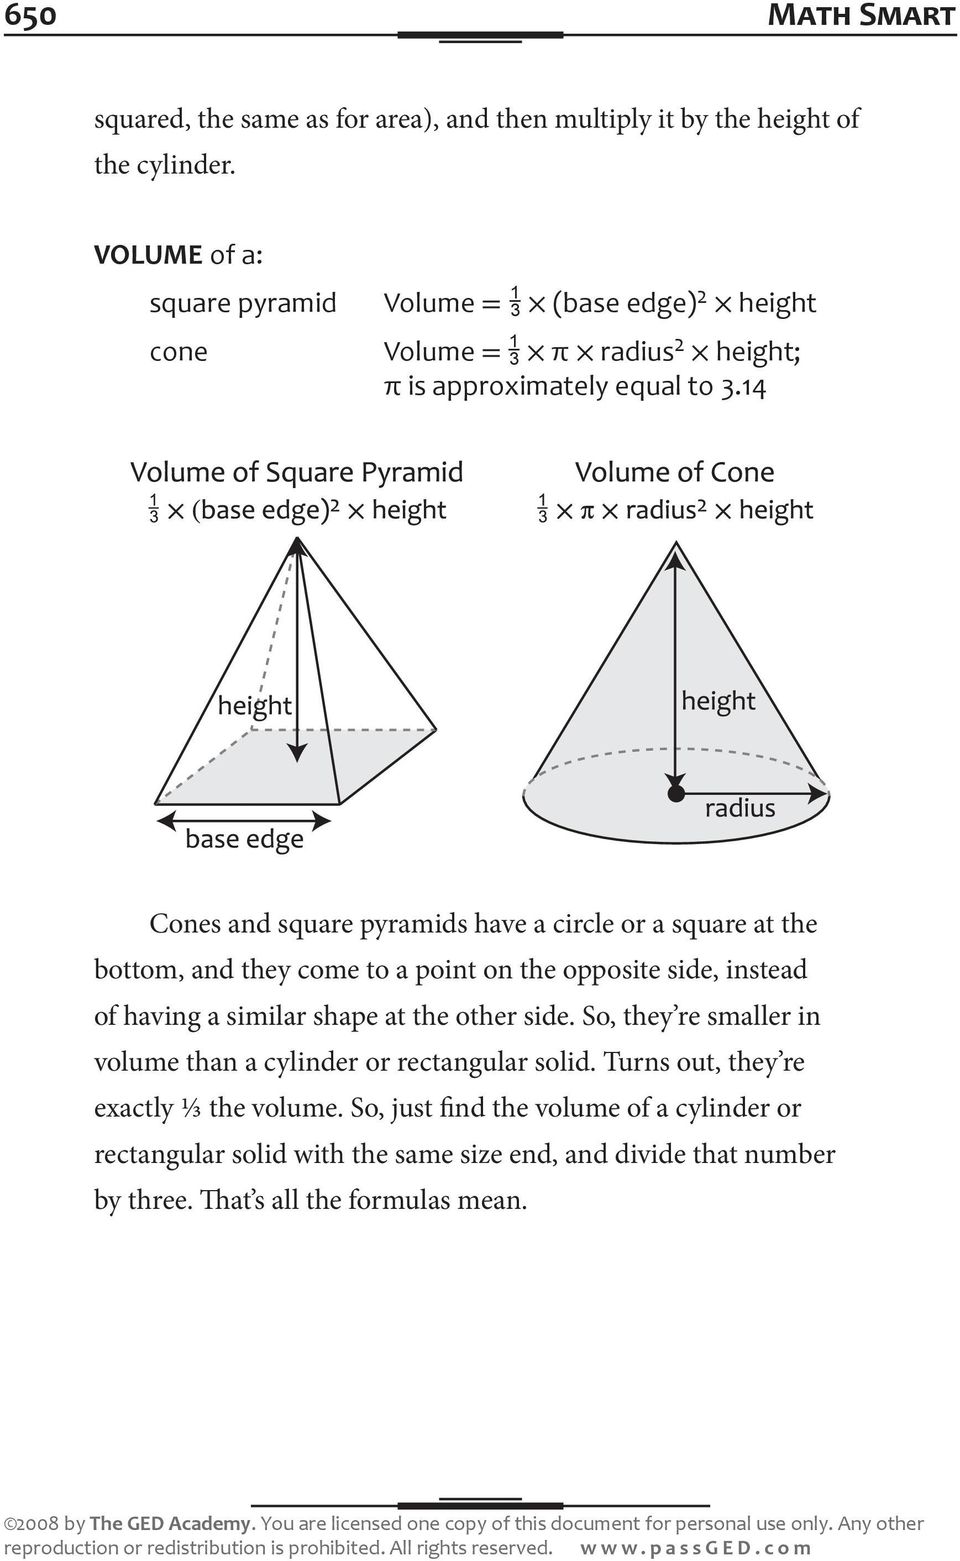 14 Cones and square pyramids have a circle or a square at the bottom, and they come to a point on the opposite side, instead of having a similar shape at the